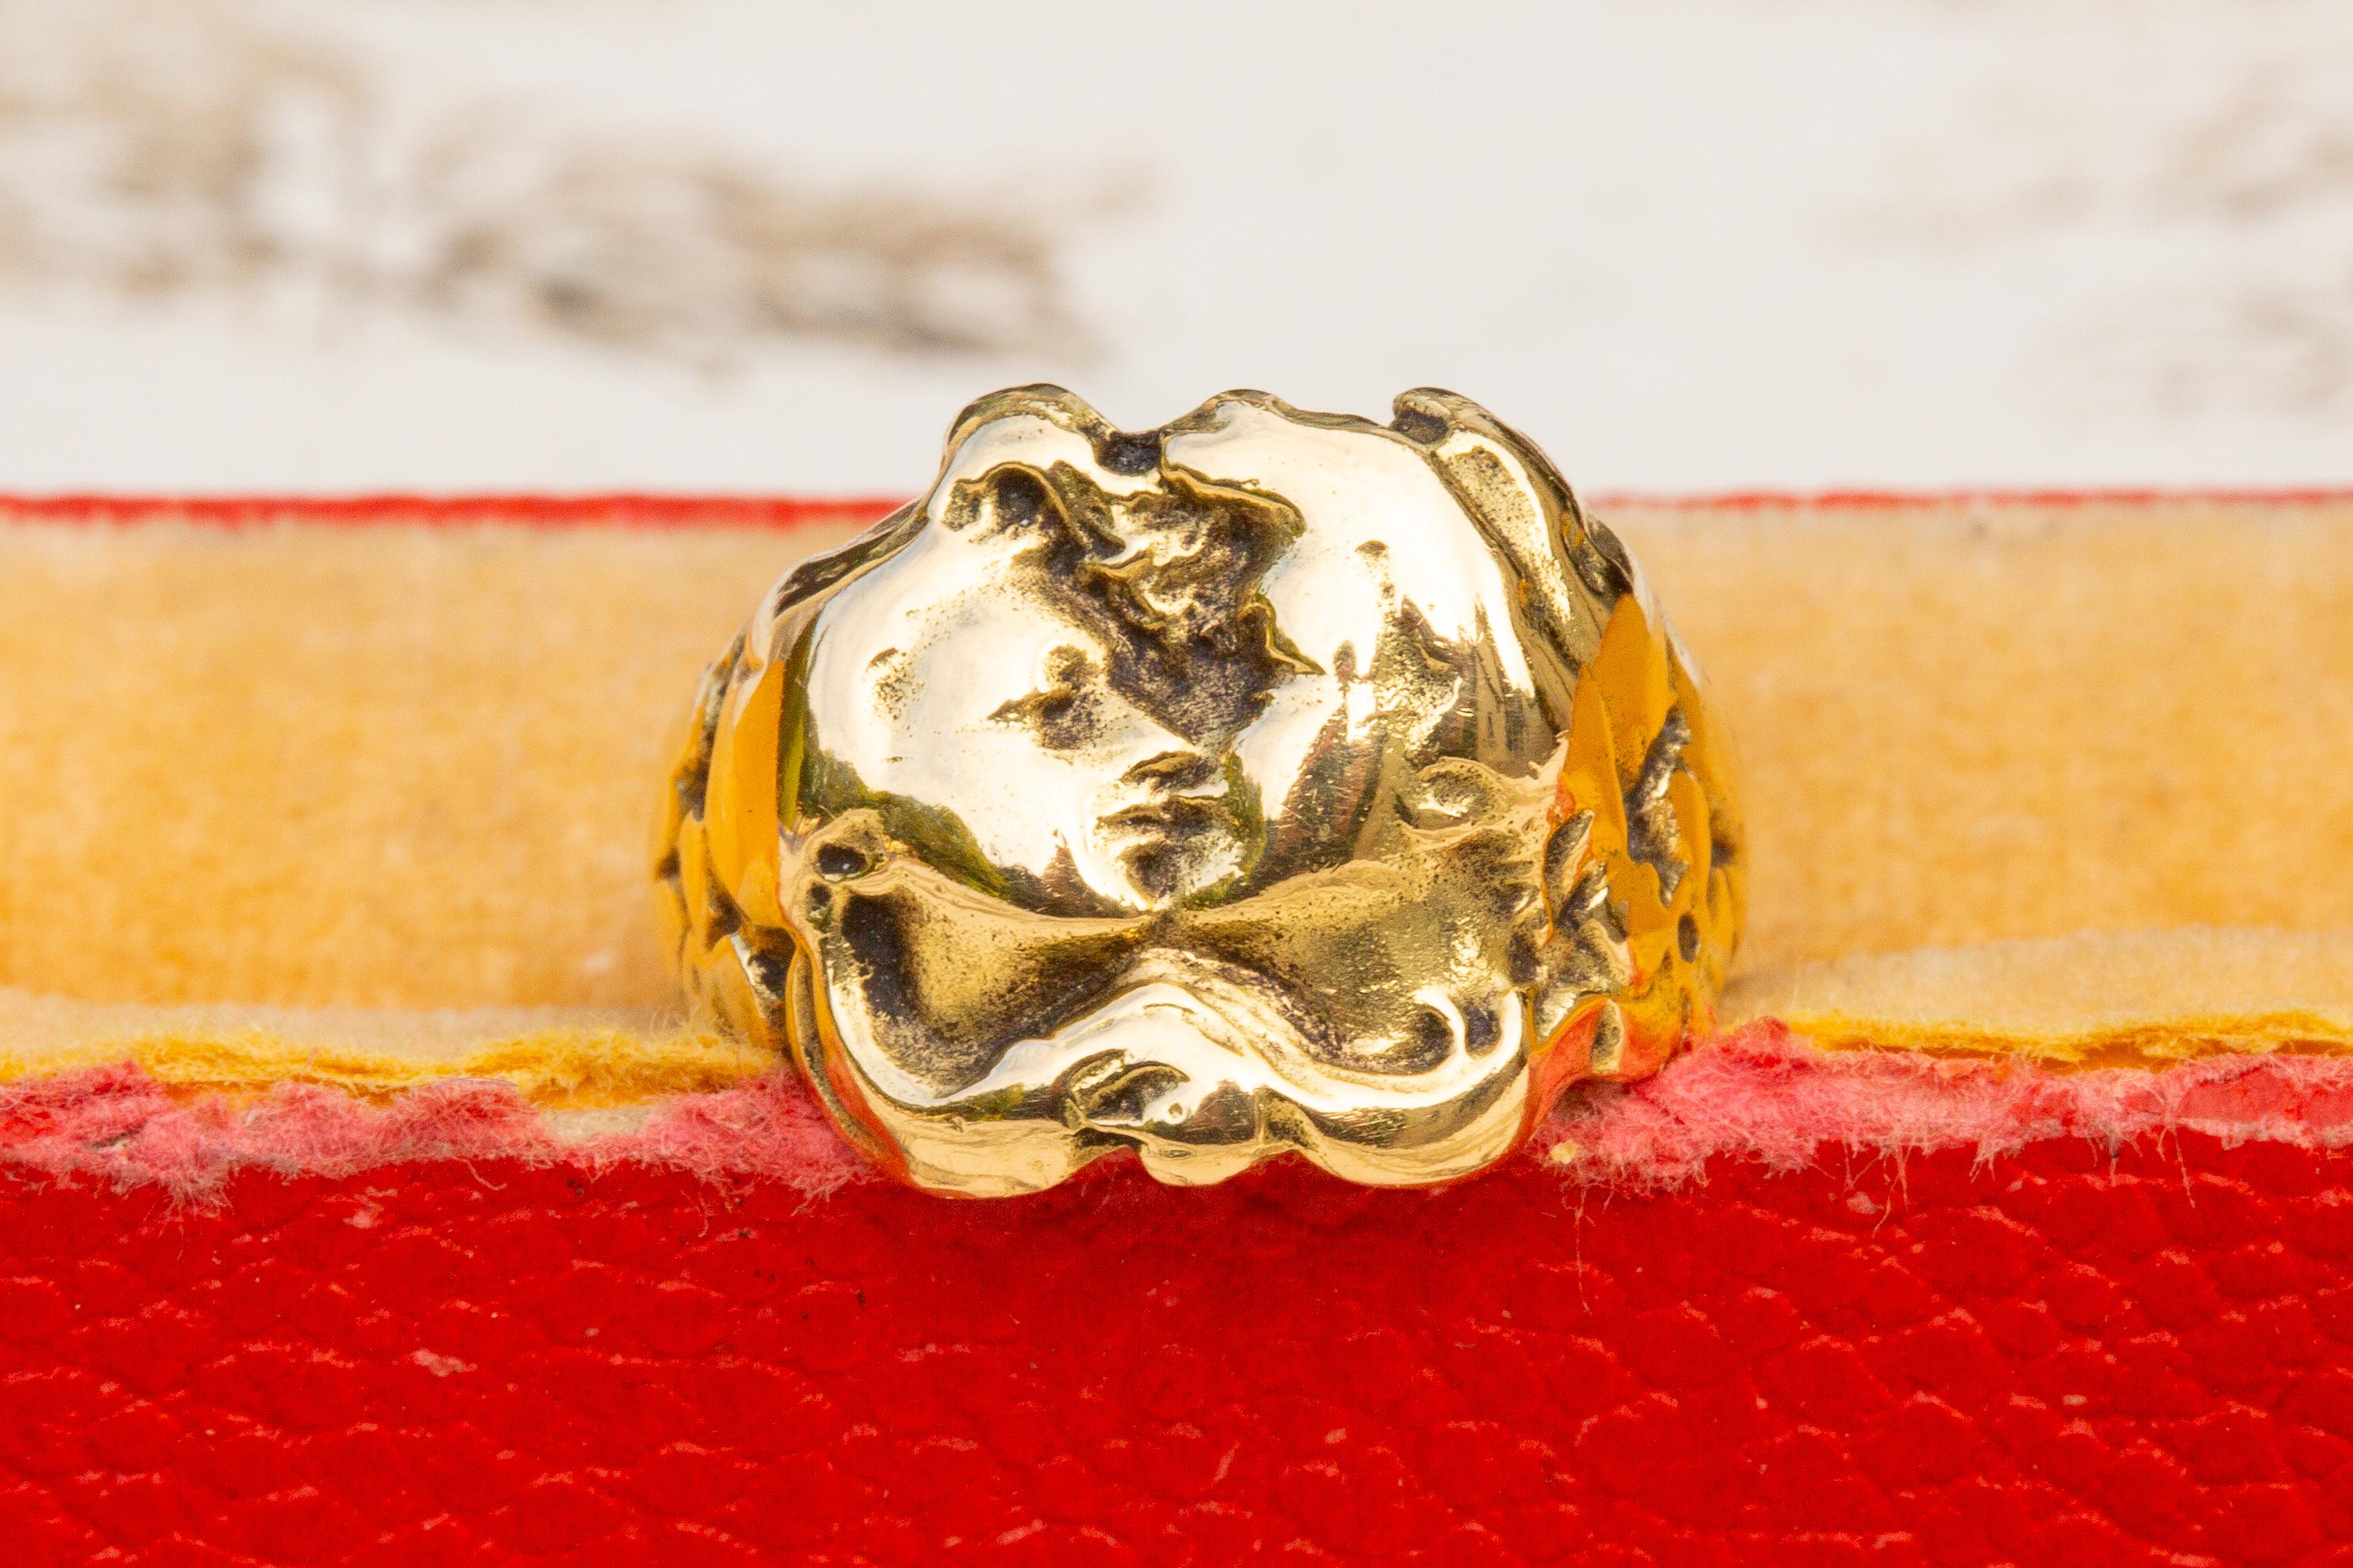  French Antique Art Nouveau 18K Gold Ethereal Figural Kissing Ring c.1910 7